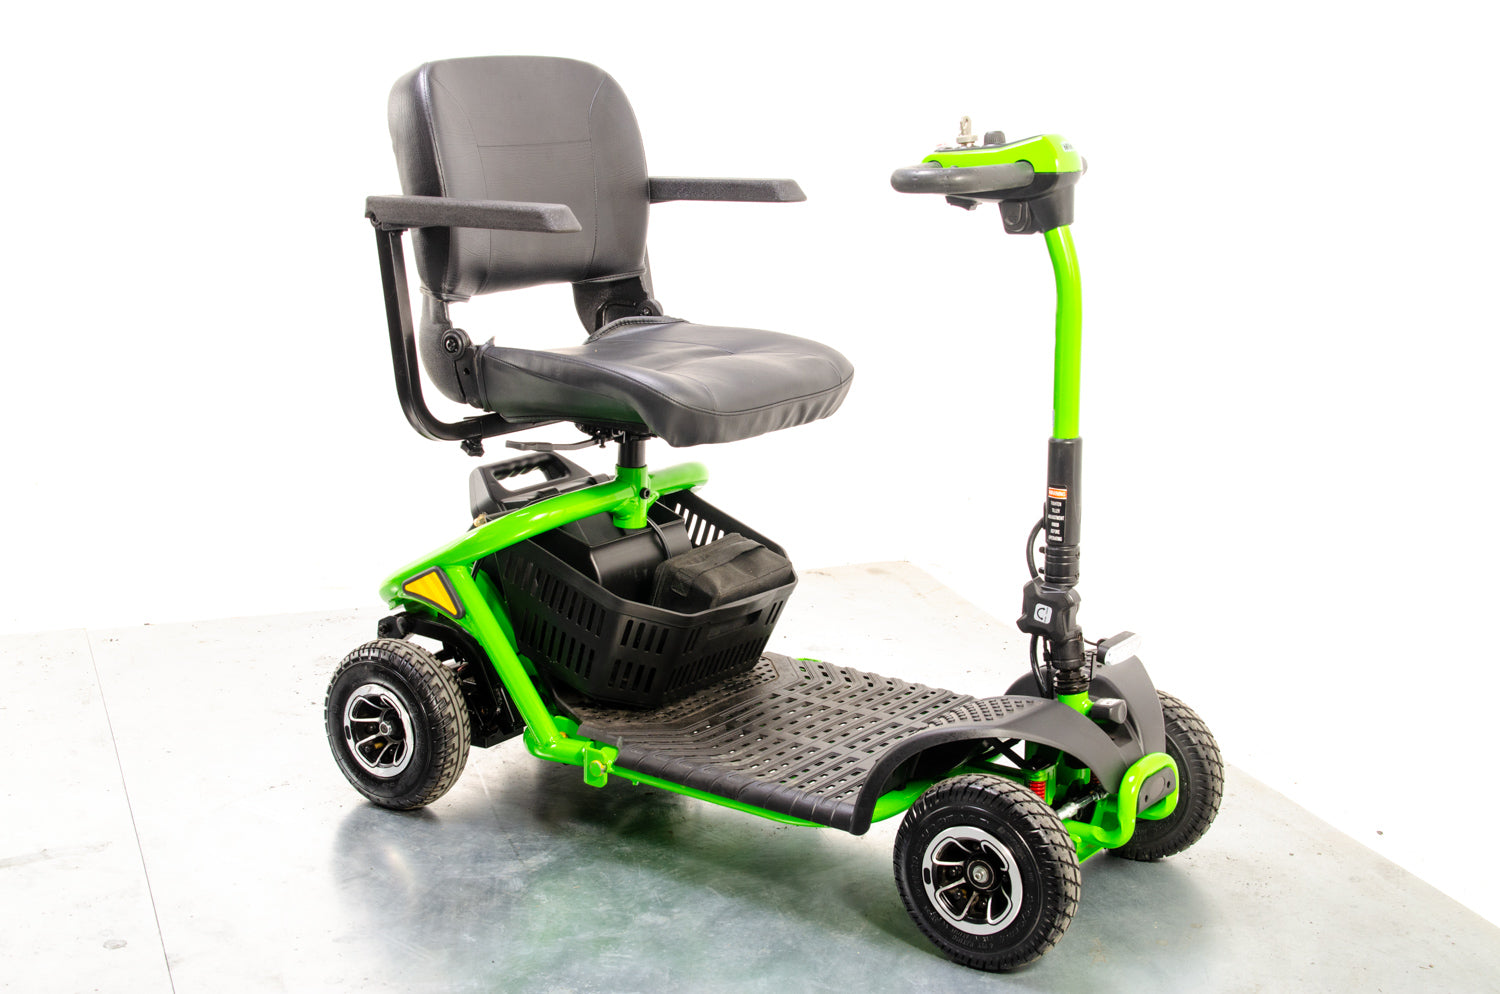 Monarch Mini 4 Plus Used Mobility Scooter Small Transportable Pneumatic Tyres Parks Green 13375